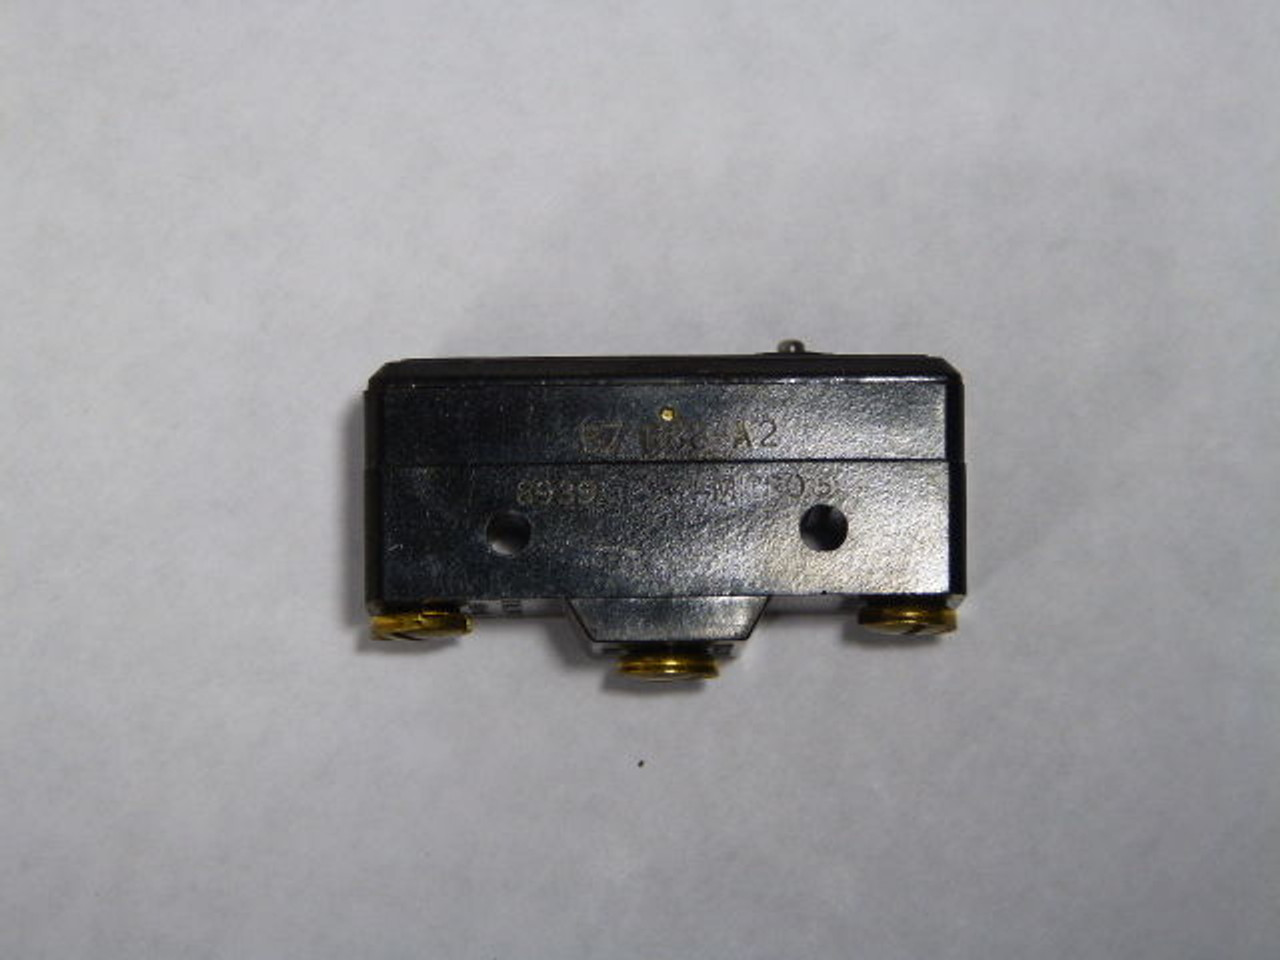 Microswitch BZ-R88-A2 Snap Action Pin Plunger Micro Switch 125/250/480V USED